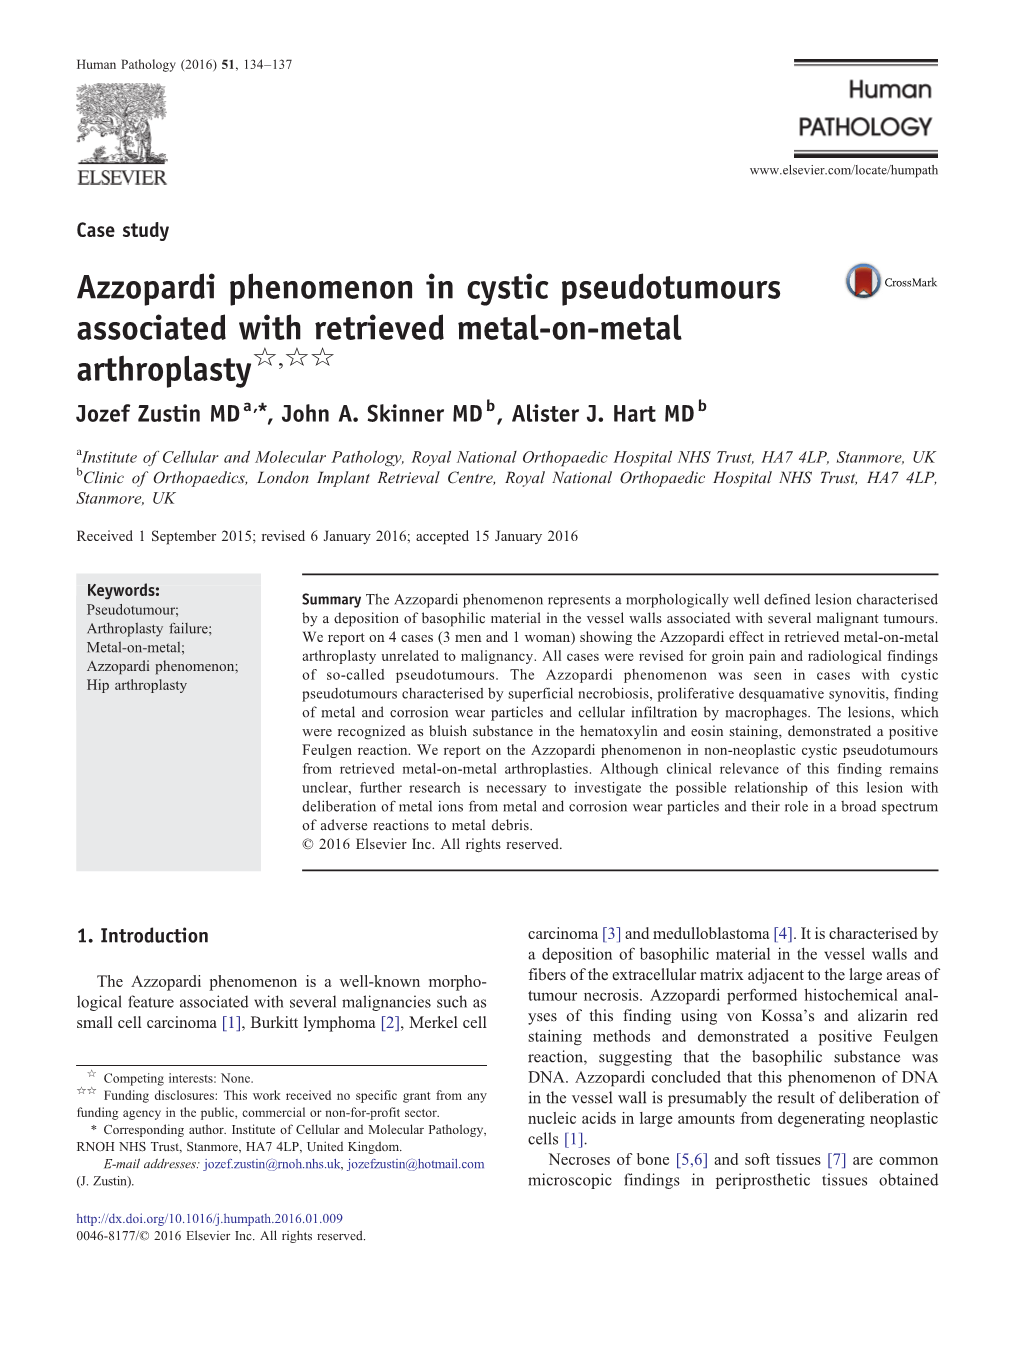 Azzopardi Phenomenon in Cystic Pseudotumours Associated with Retrieved Metal-On-Metal Arthroplasty☆,☆☆ Jozef Zustin MD A,⁎, John A